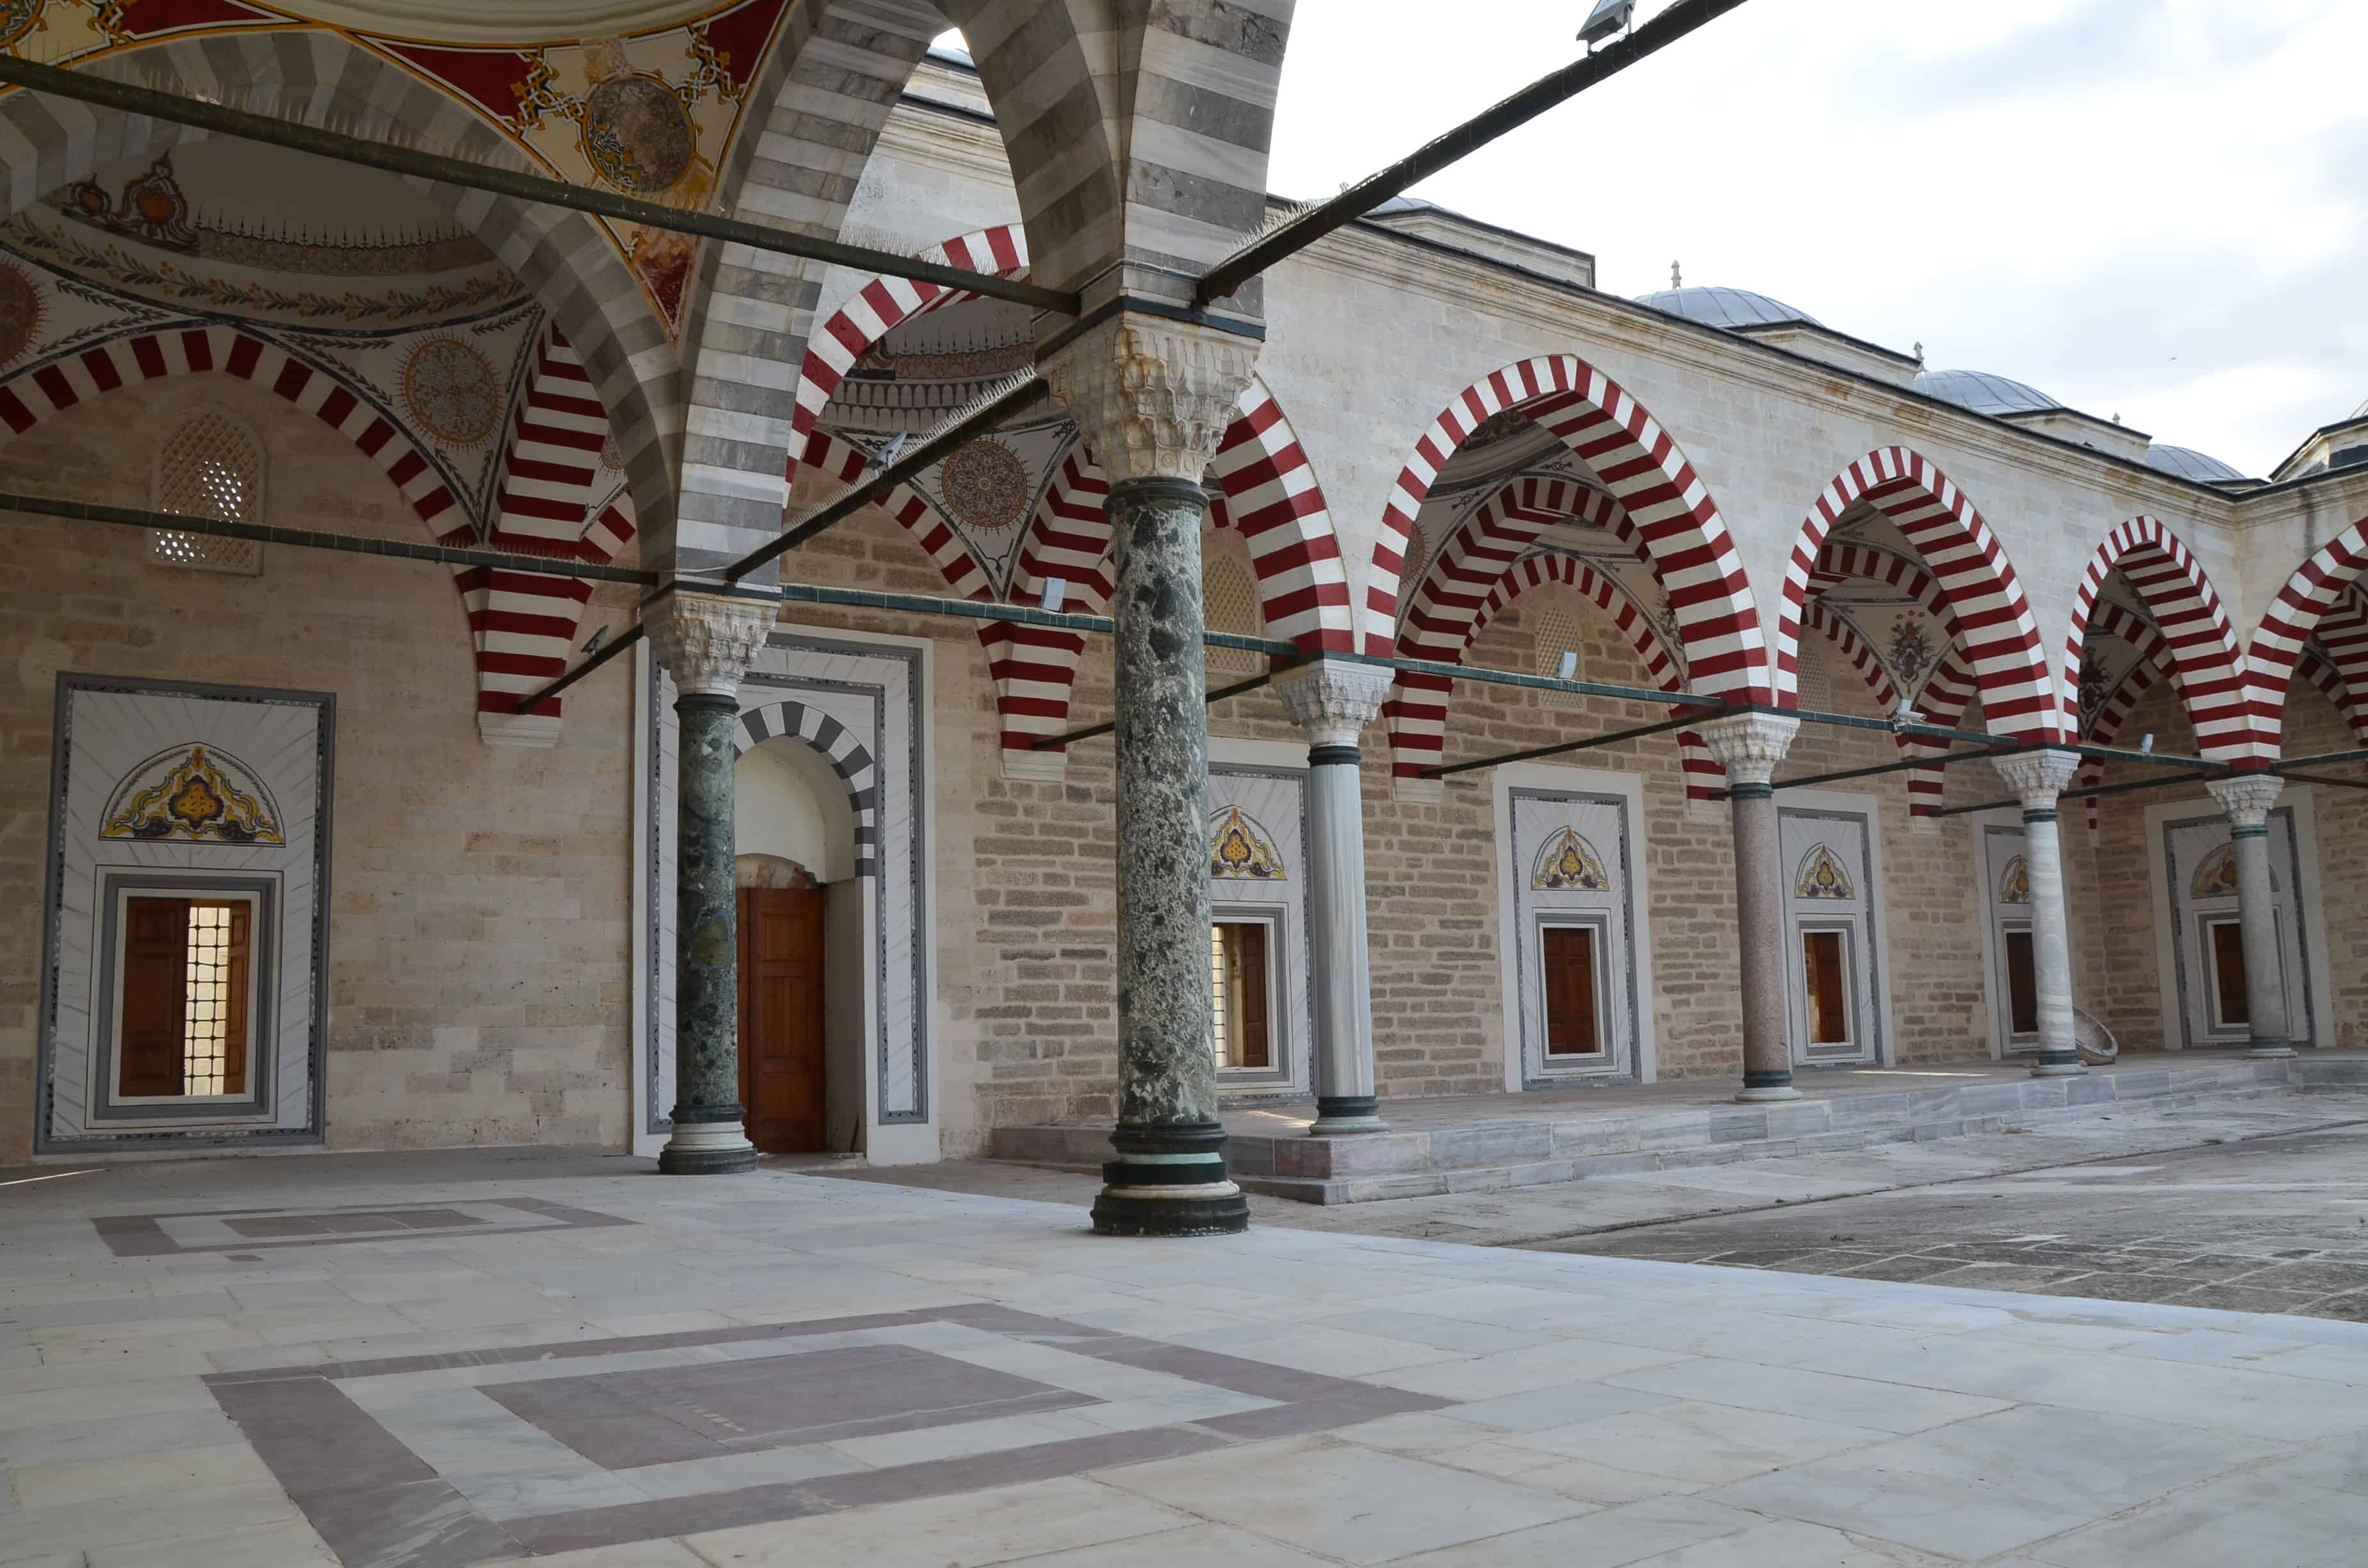 Arched portico at the inner courtyard at the Bayezid II Mosque in Edirne, Turkey